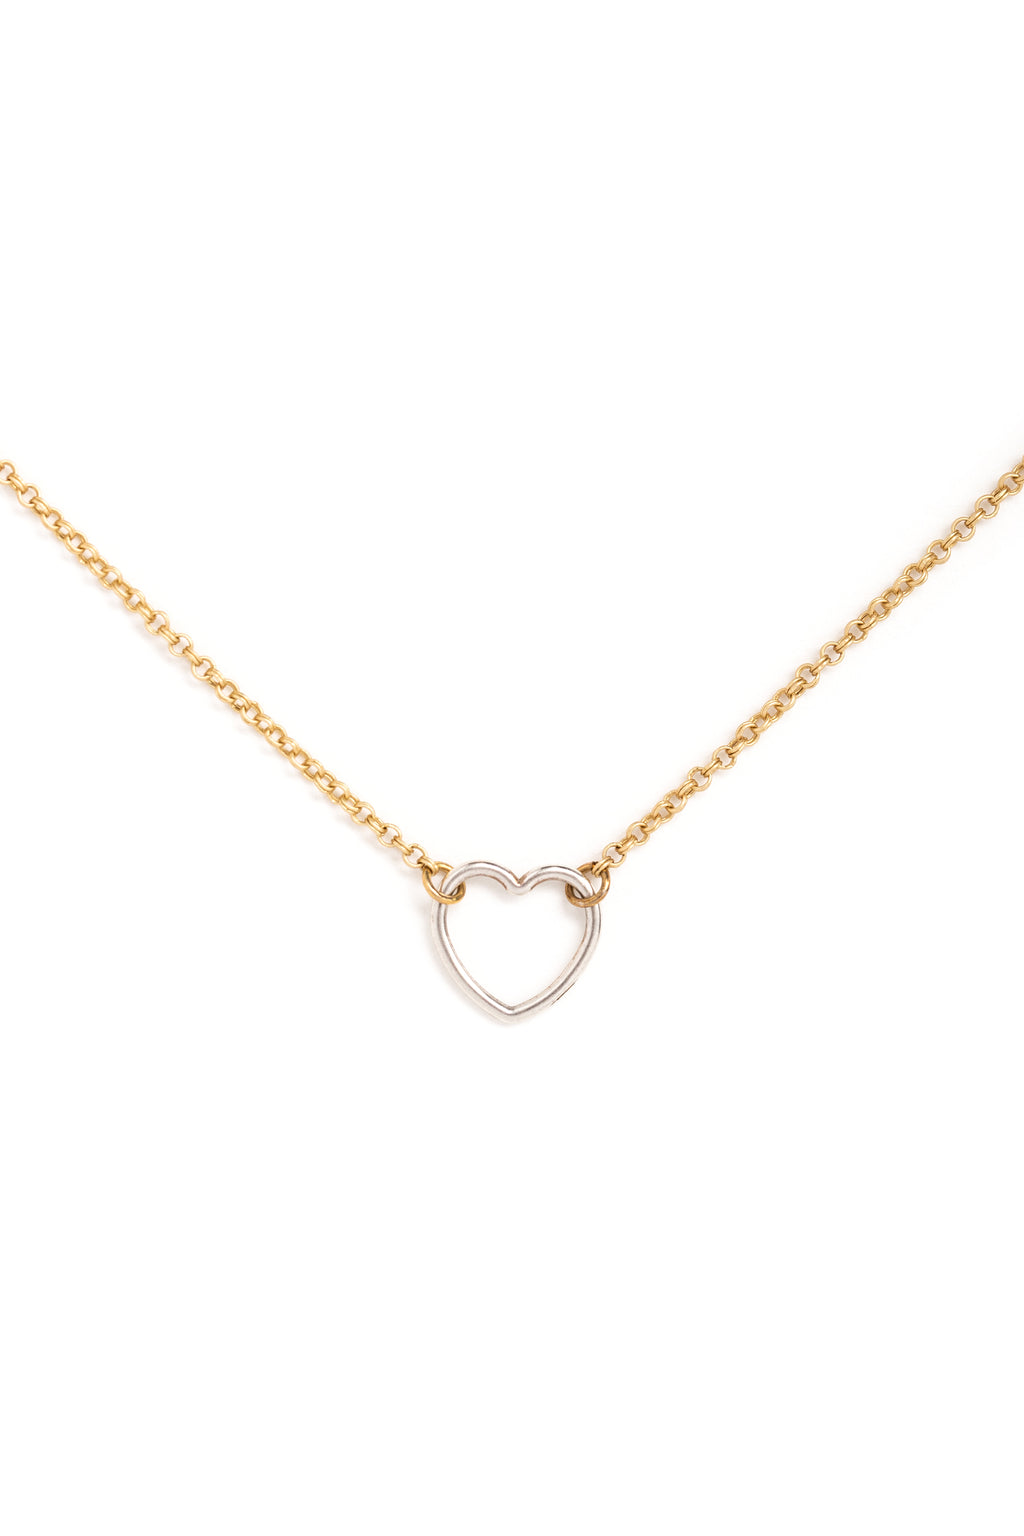 Silver Heart Necklace on Gold Chain